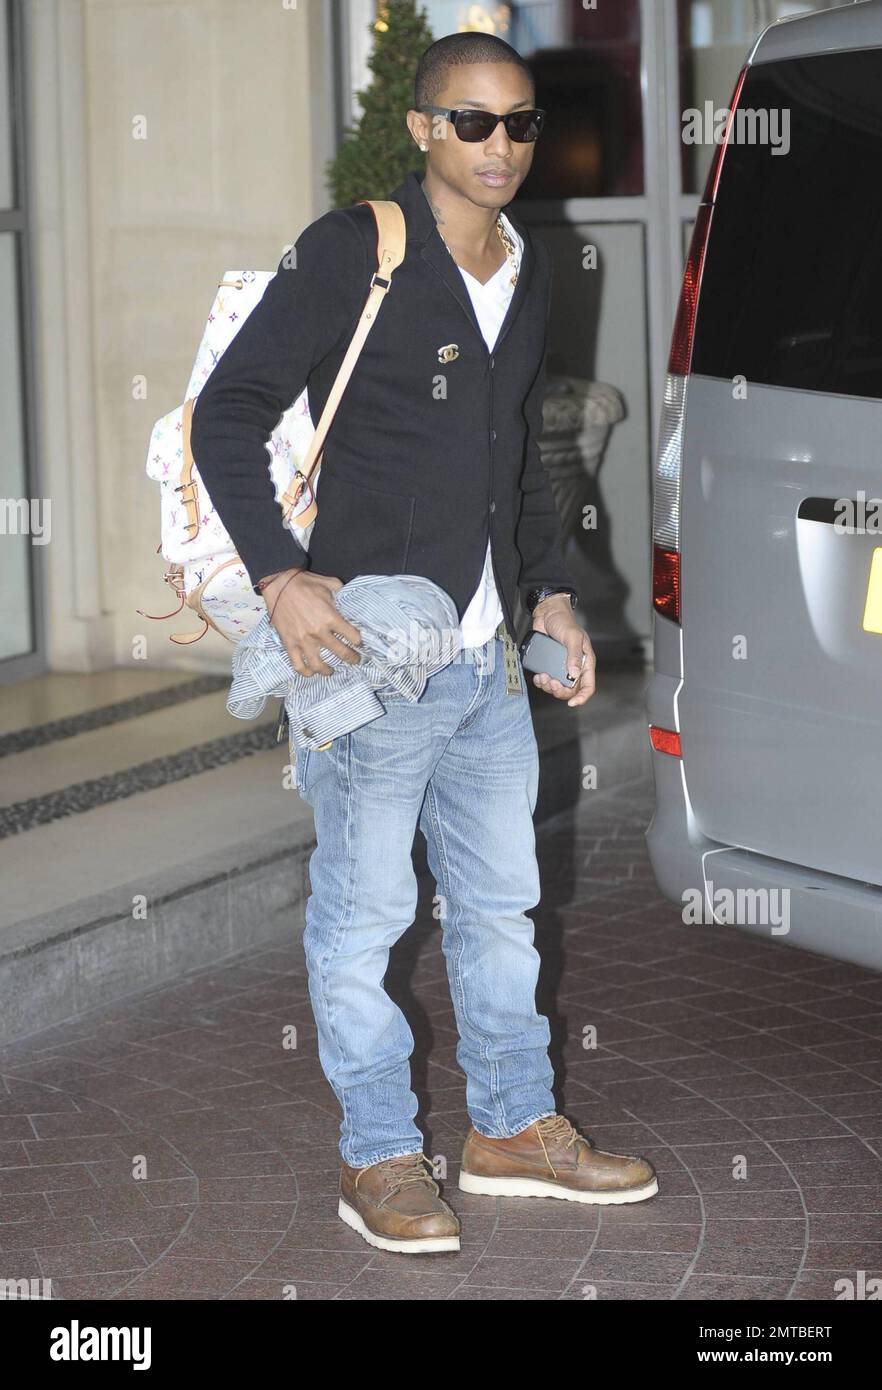 American musician Pharrell Williams of the hip hop and funk band N.E.R.D  leaves his London hotel. Pharrell, 37, is in town to perform with N.E.R.D  during their European tour. Also noted as